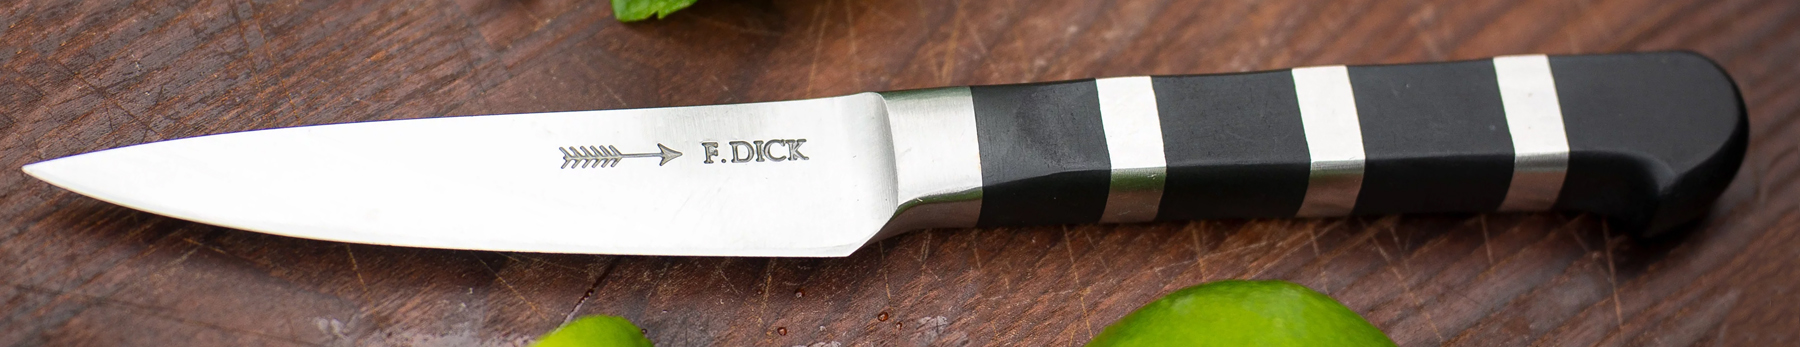 FDick 1905 series paring knife displayed in an image banner